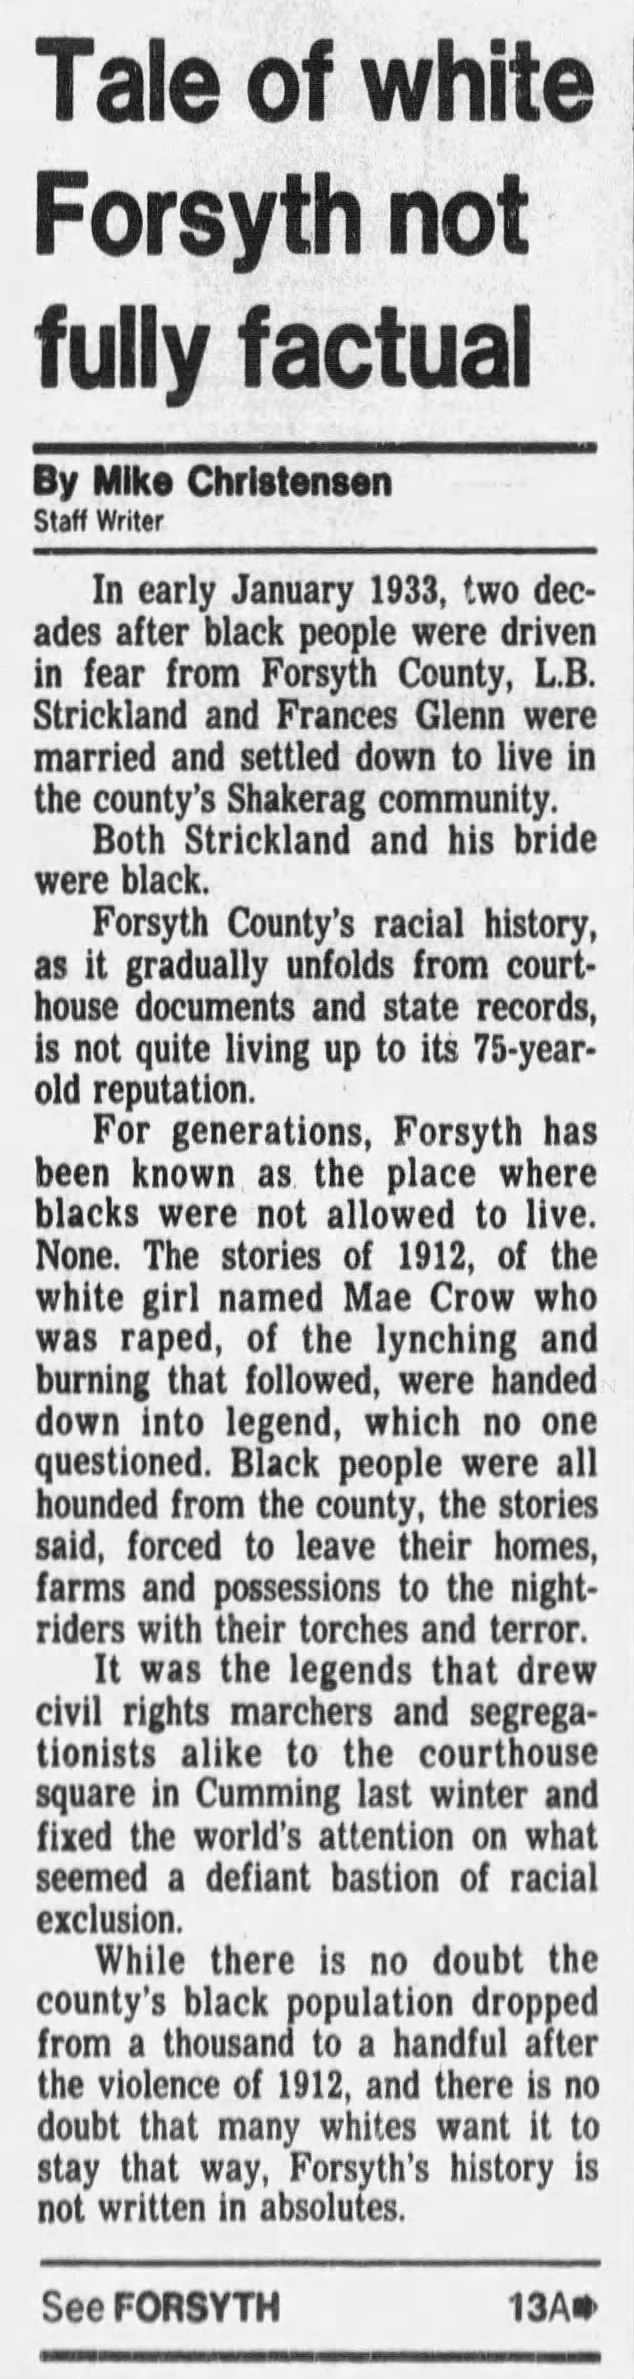 Tale of white Forsyth not fully factual